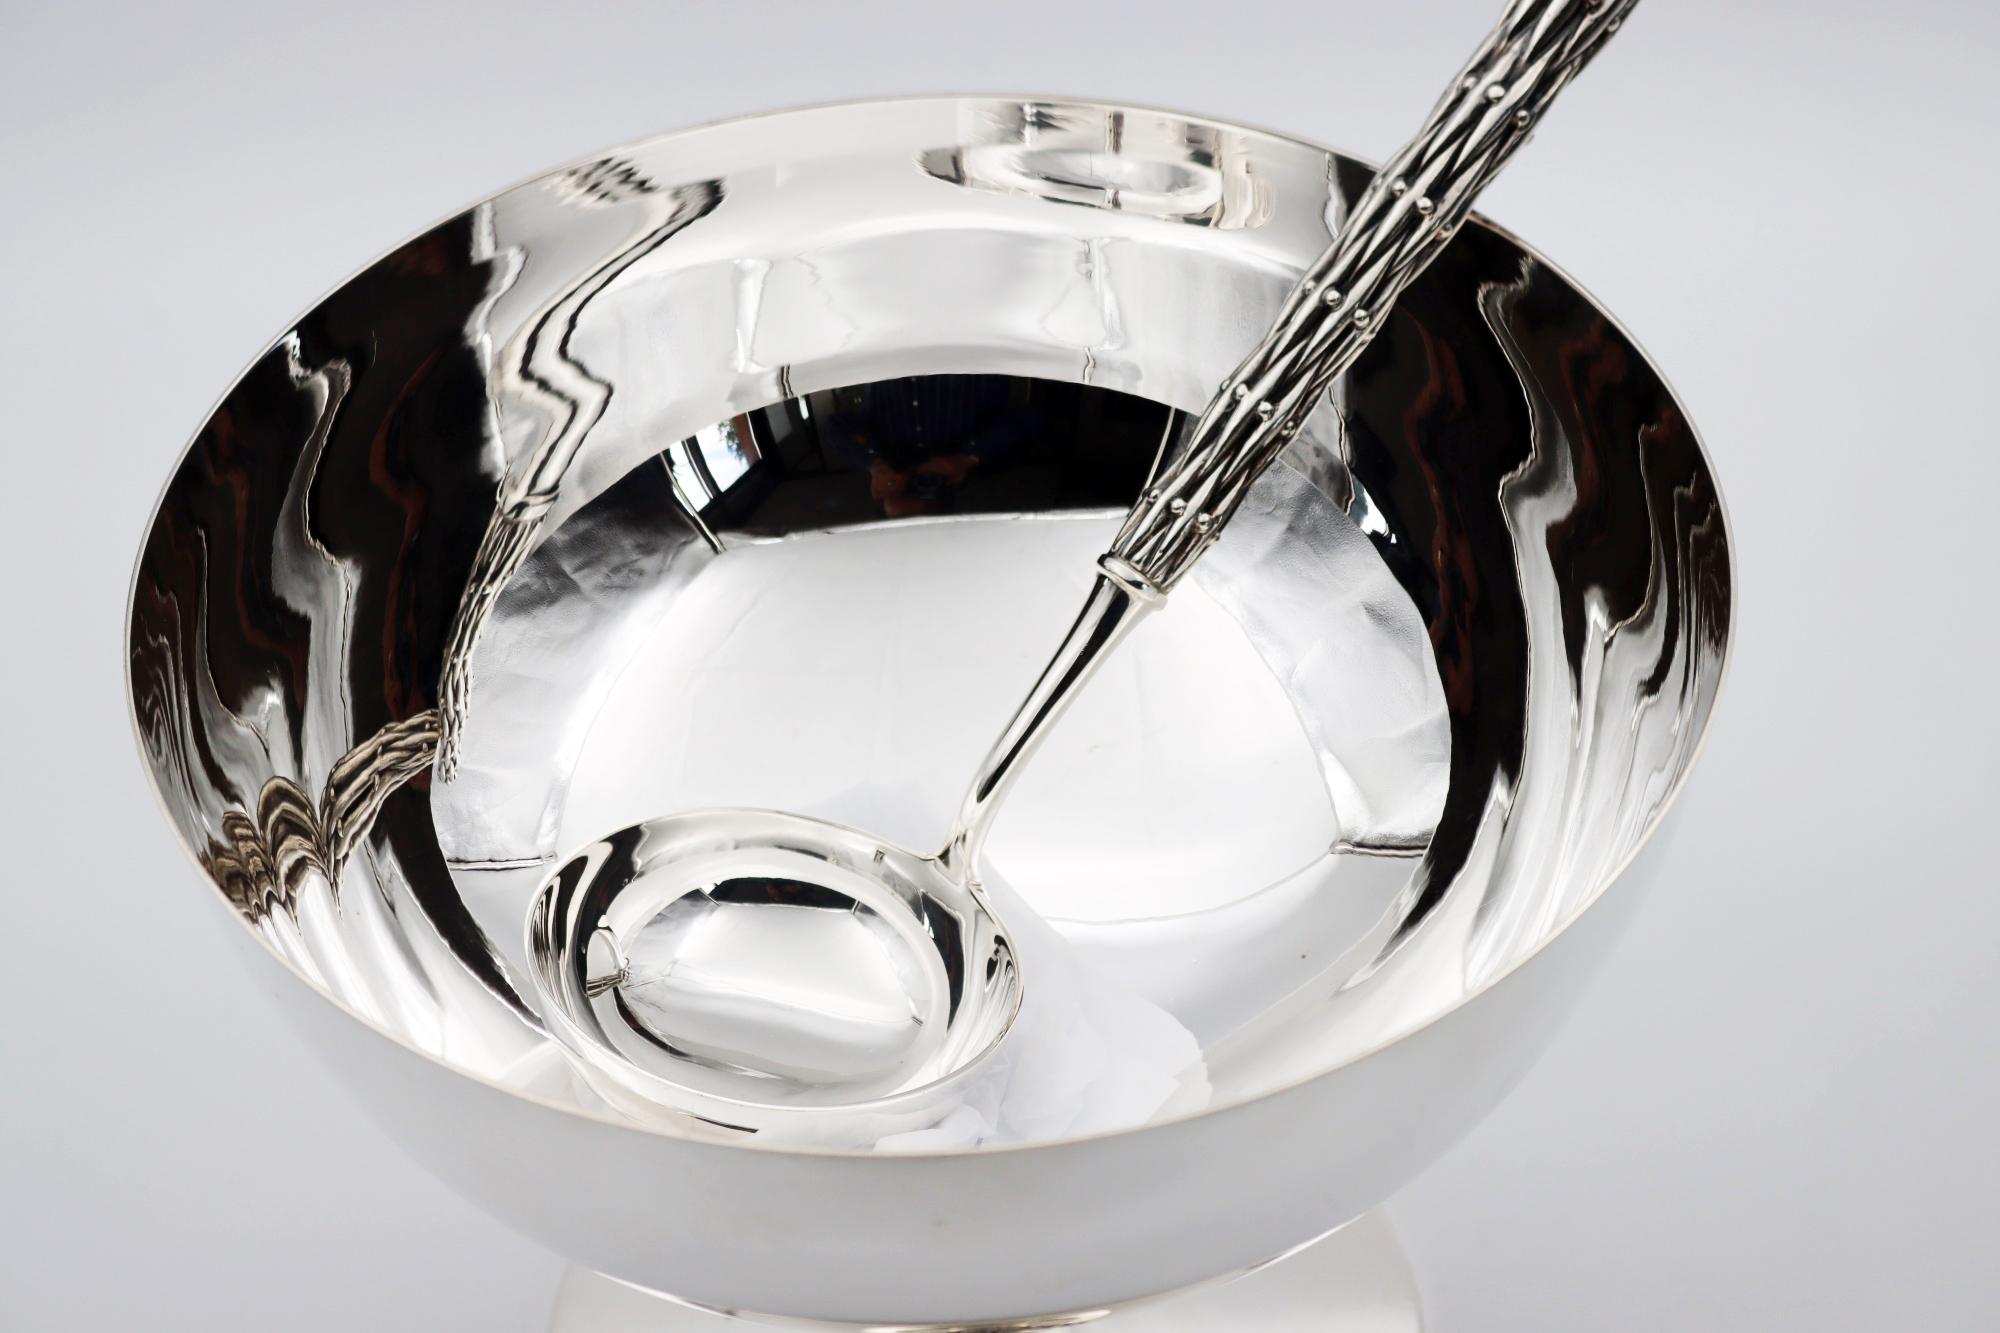 Ladle and large centerpiece in silver bronze

Silver plated bronze ladle 35/42 microns
Length: 218 mm, weight: 296 gr

Large silver plated bronze centrepiece 35/42 microns
H: 195 mm, 240 mm

These Ladles and Large Centrepieces are the handiwork of